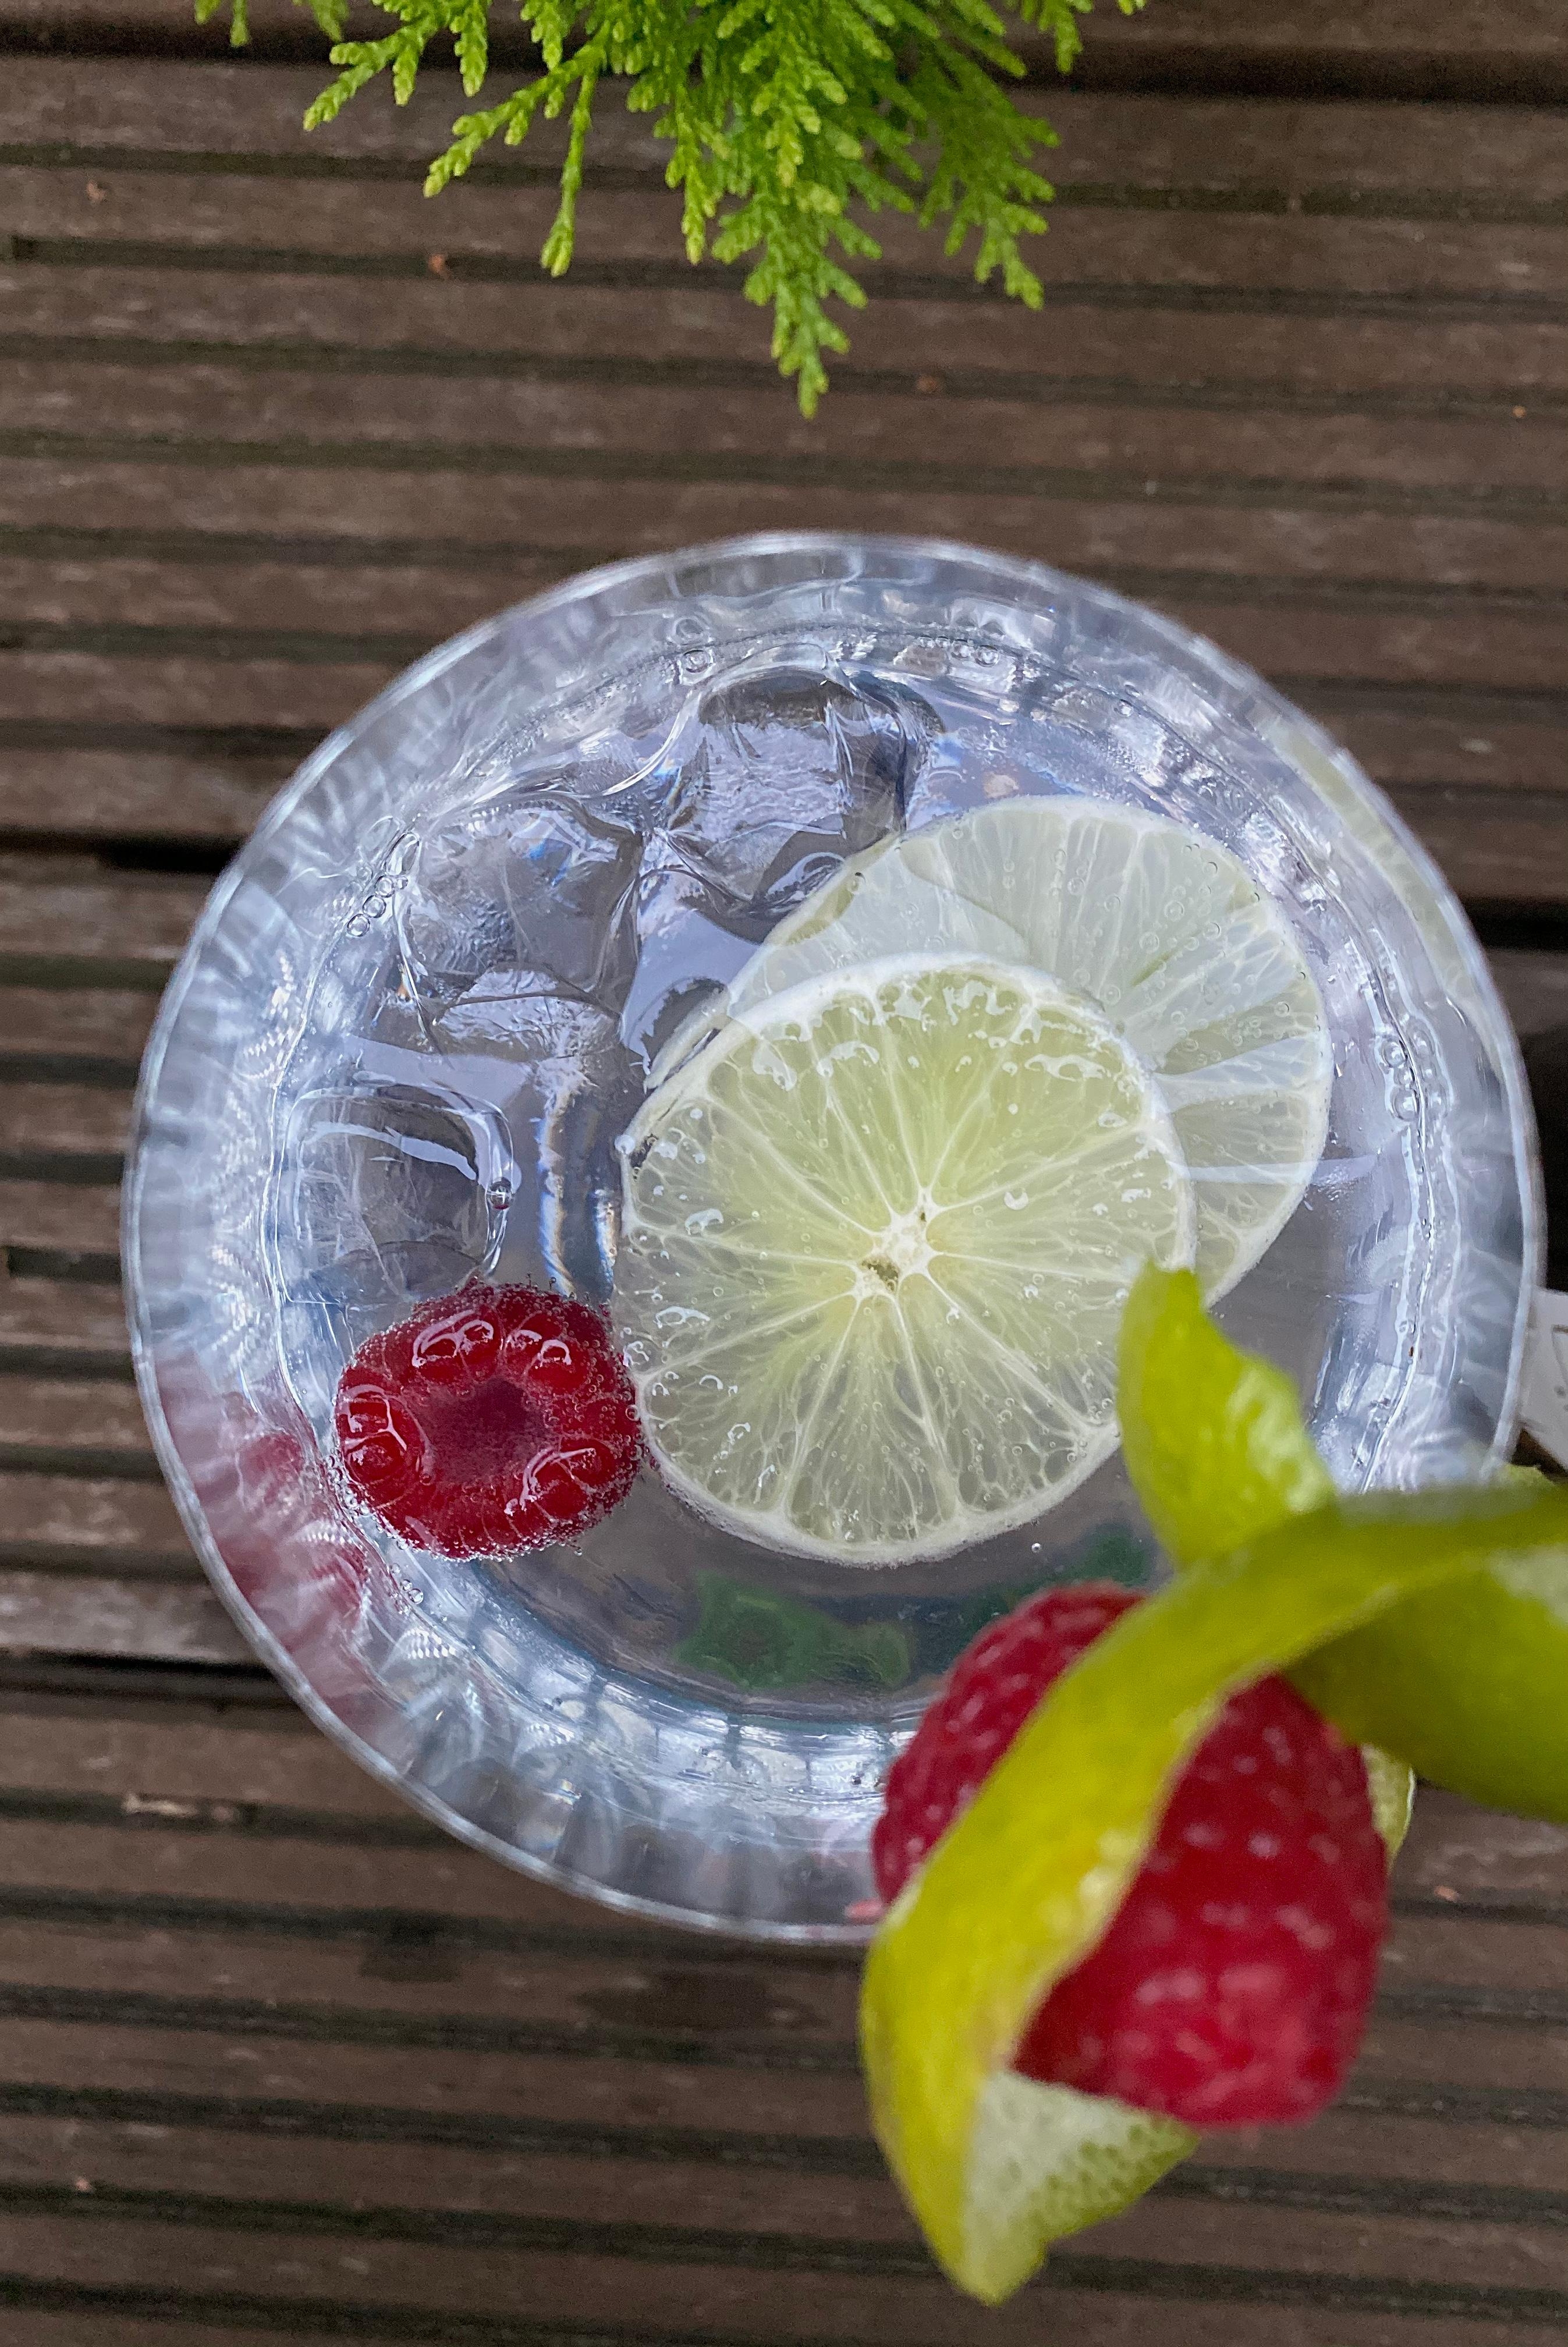 refreshing Gin Tonic
#partydrinks #drinks #cocktails